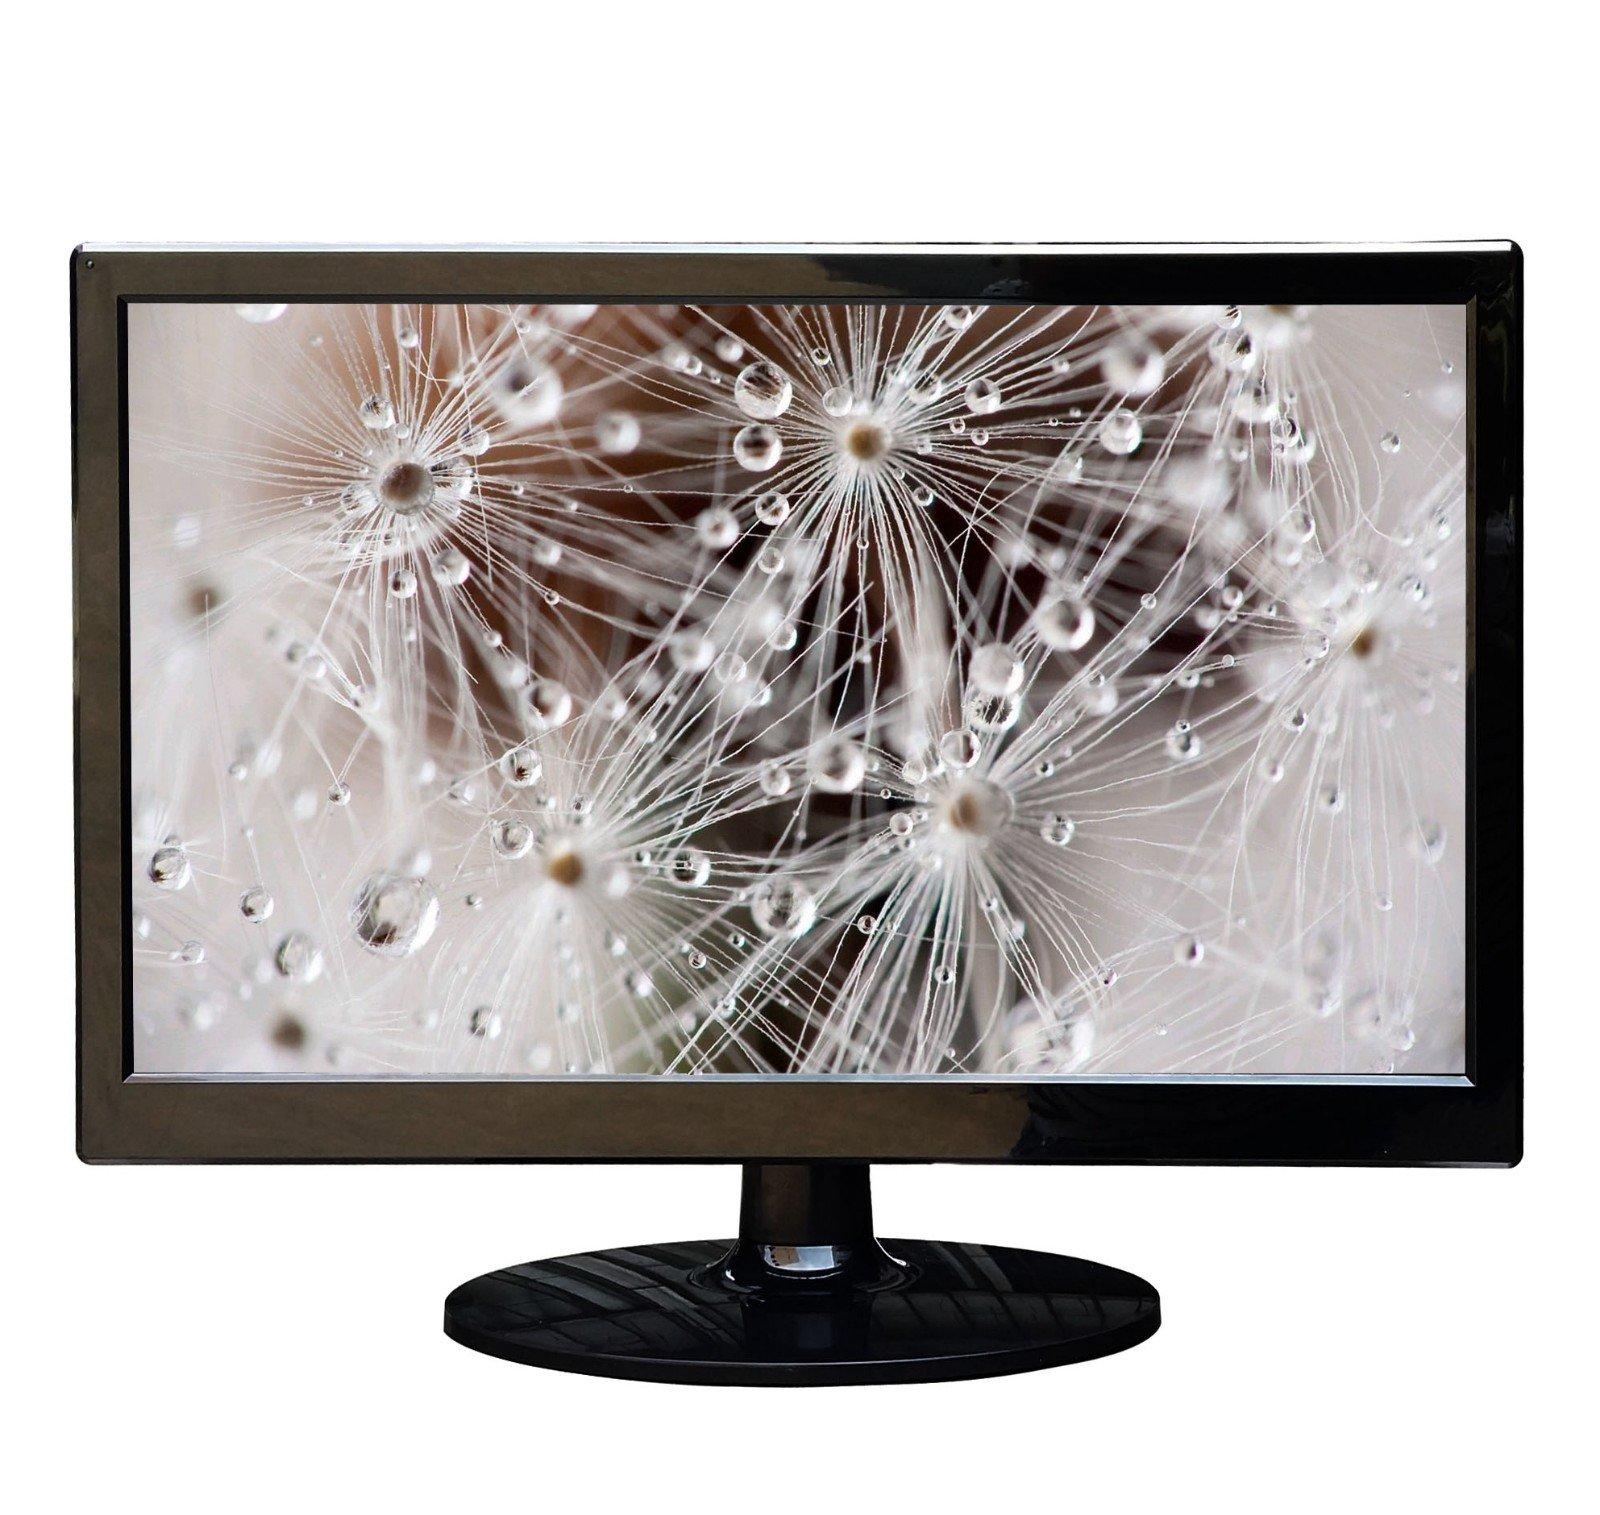 Xinyao LCD hot brand 19 inch full hd monitor front speaker for lcd screen